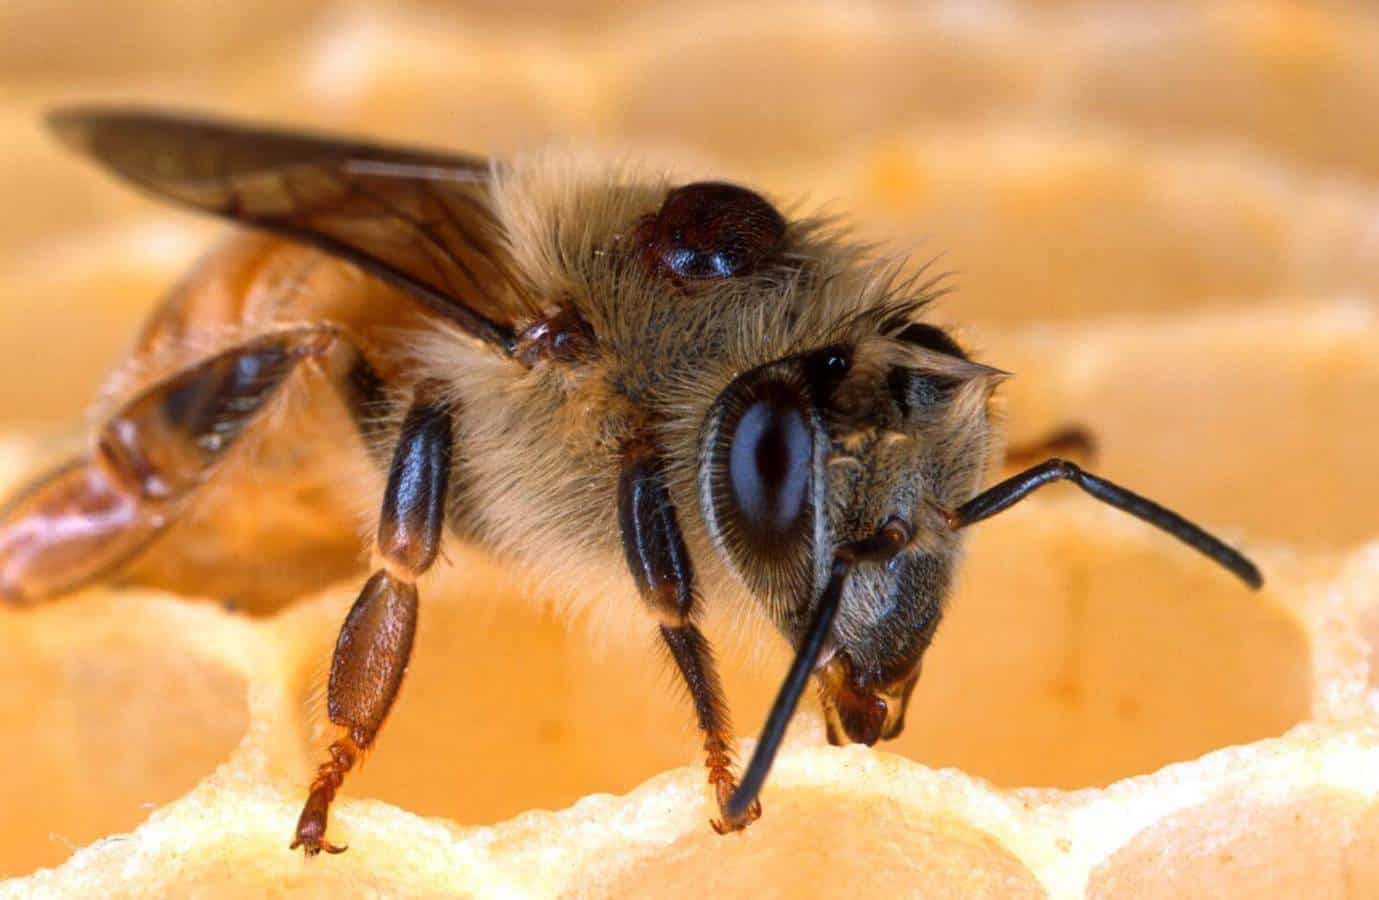 Varroa mites seen living on a honey bee. Mites weaken bees' immune systems, transmit viruses, and siphon off nutrients.